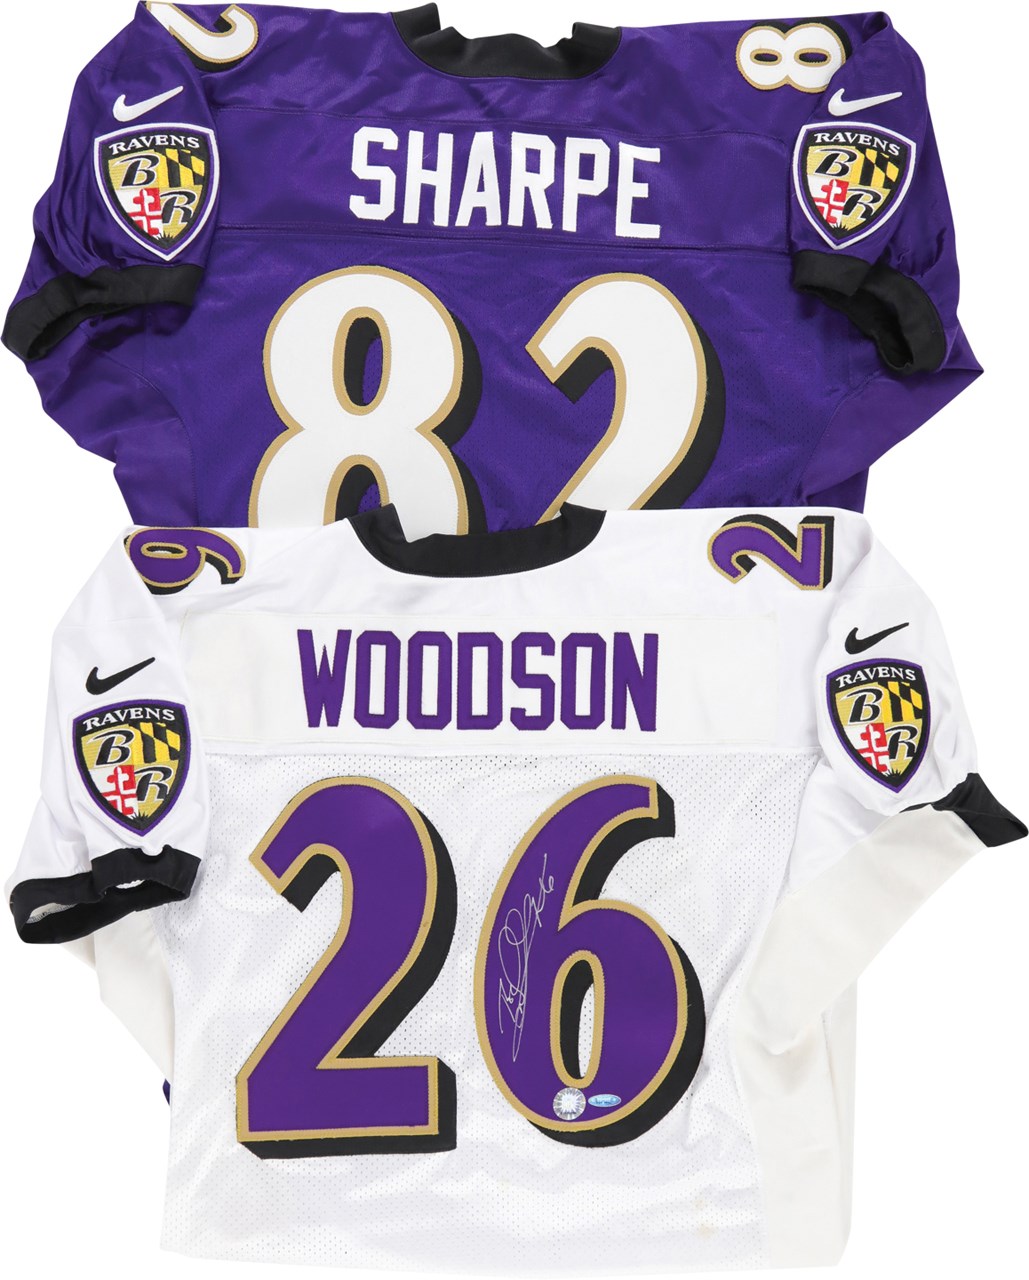 2000 Rod Woodson and Shannon Sharpe Baltimore Ravens Game Issued Jerseys